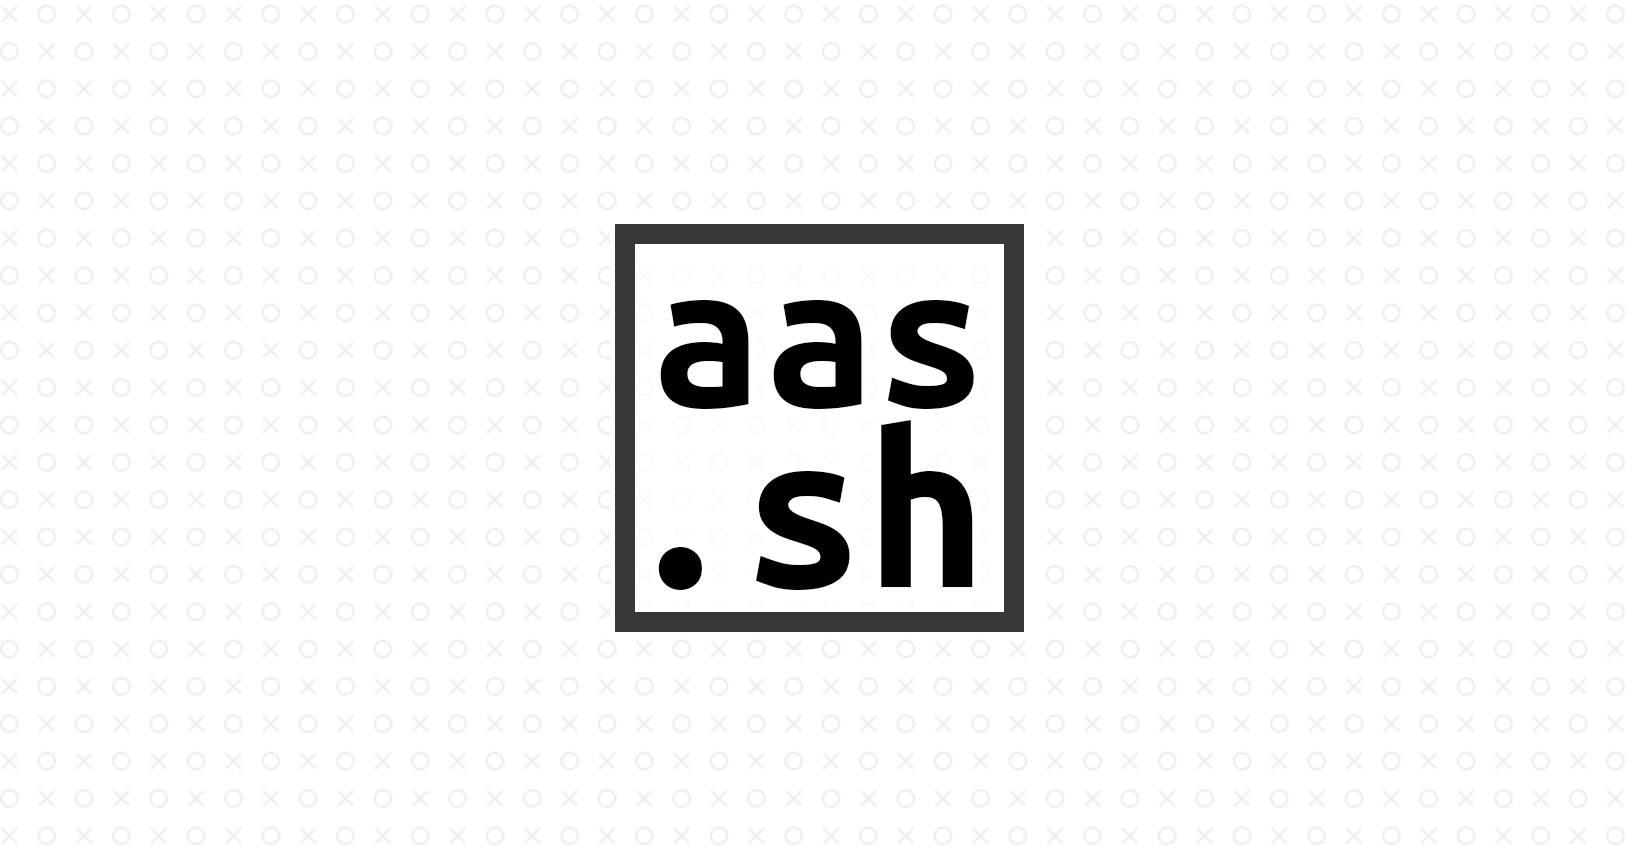 Image for My Website: aas.sh